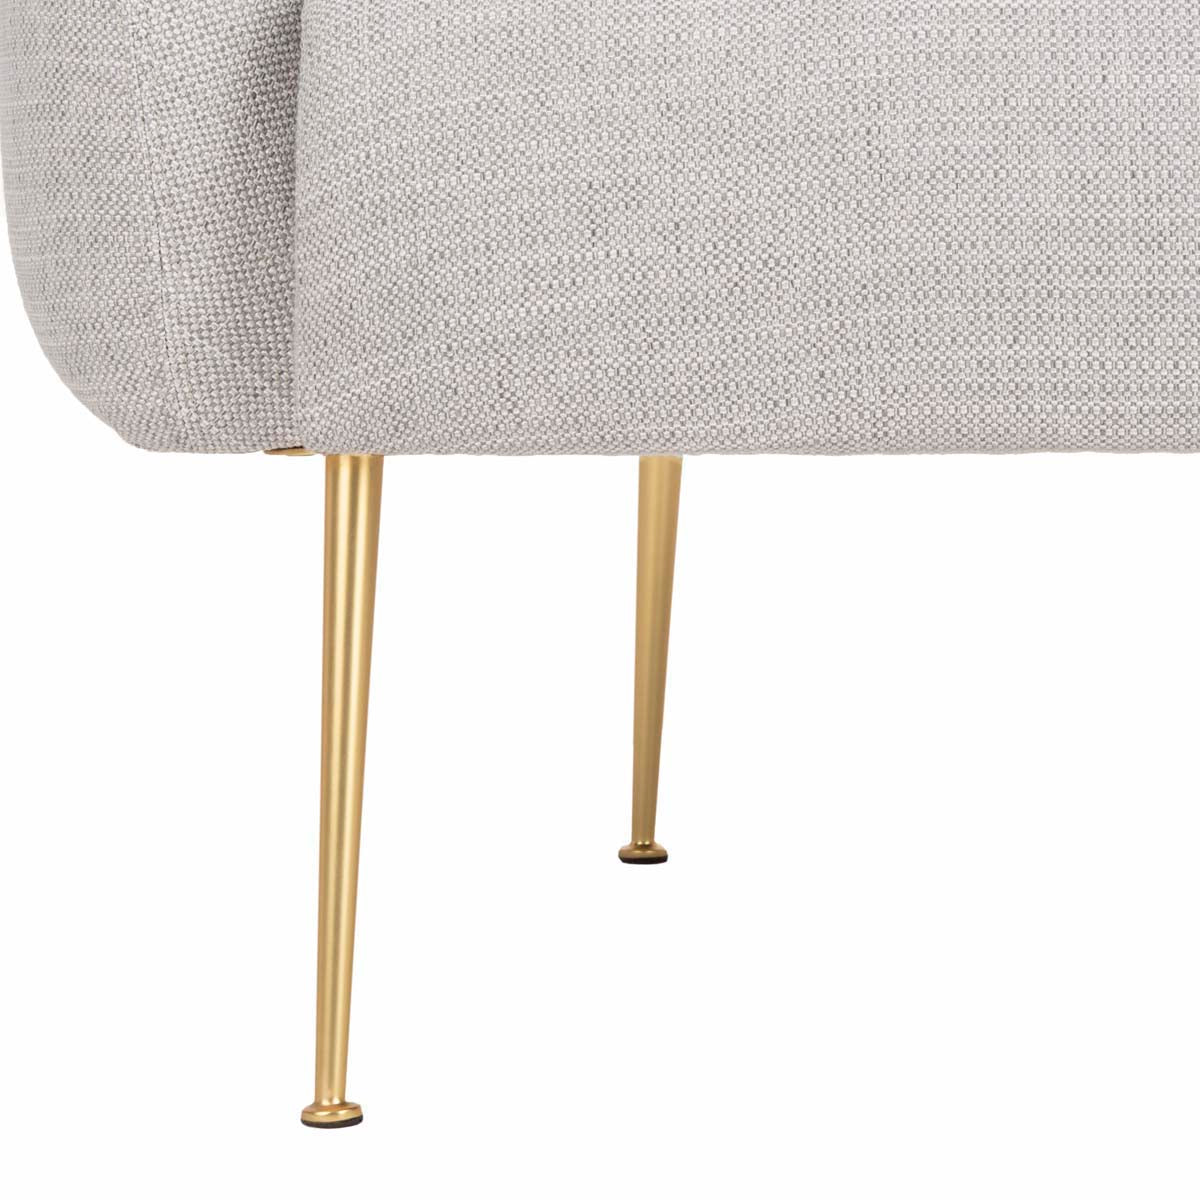 Safavieh Couture Alena Accent Chair - Light Grey